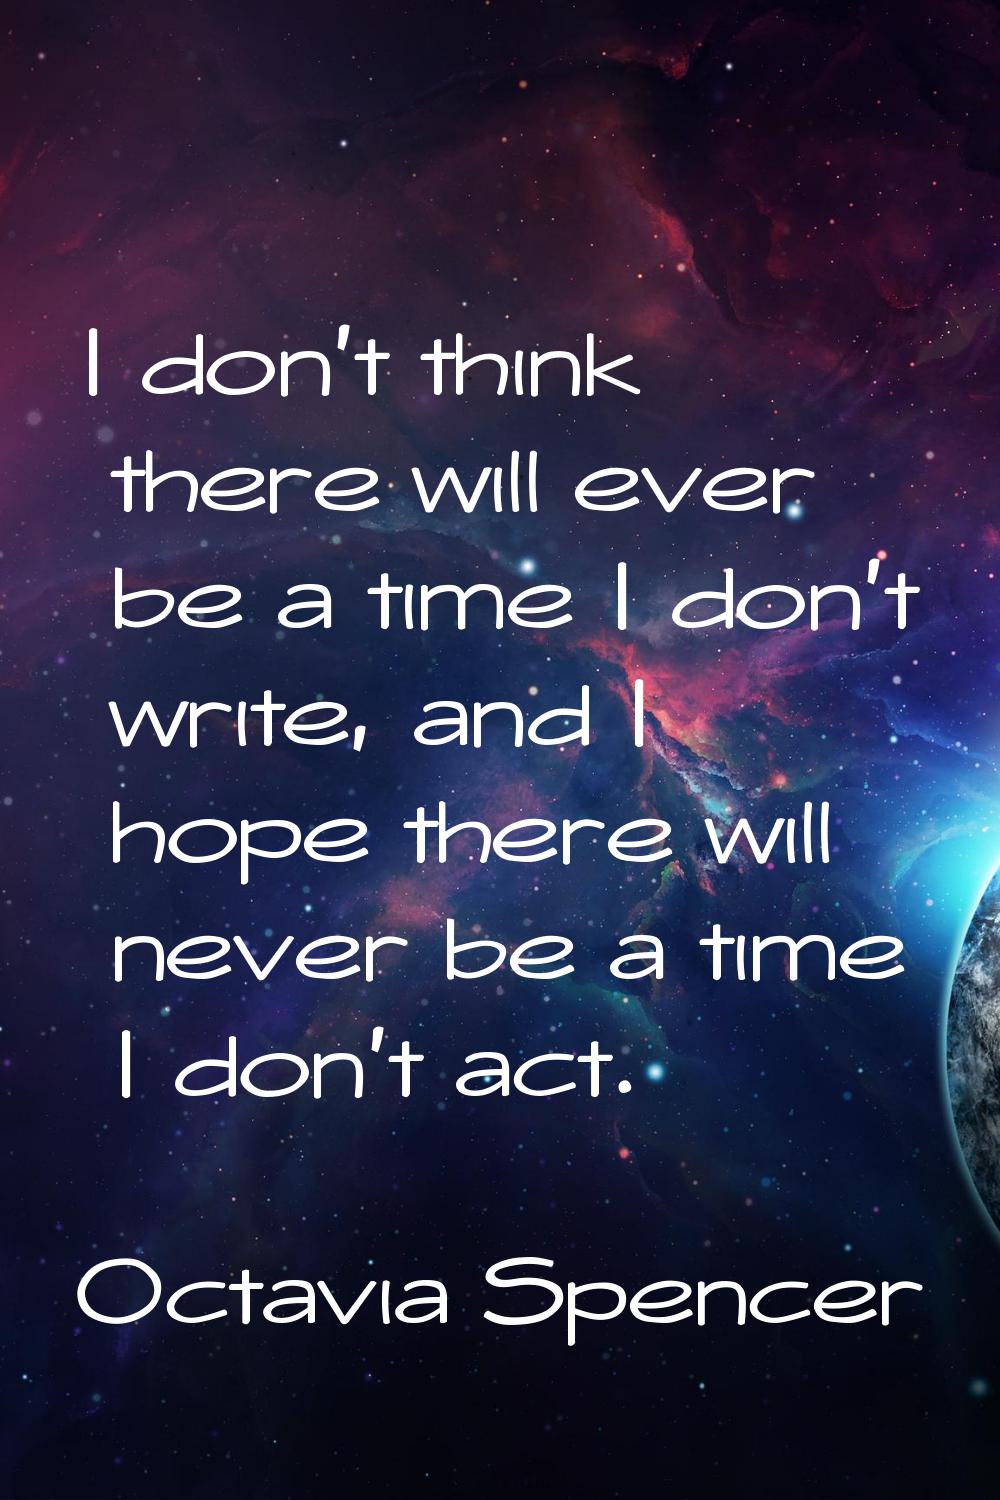 I don't think there will ever be a time I don't write, and I hope there will never be a time I don'